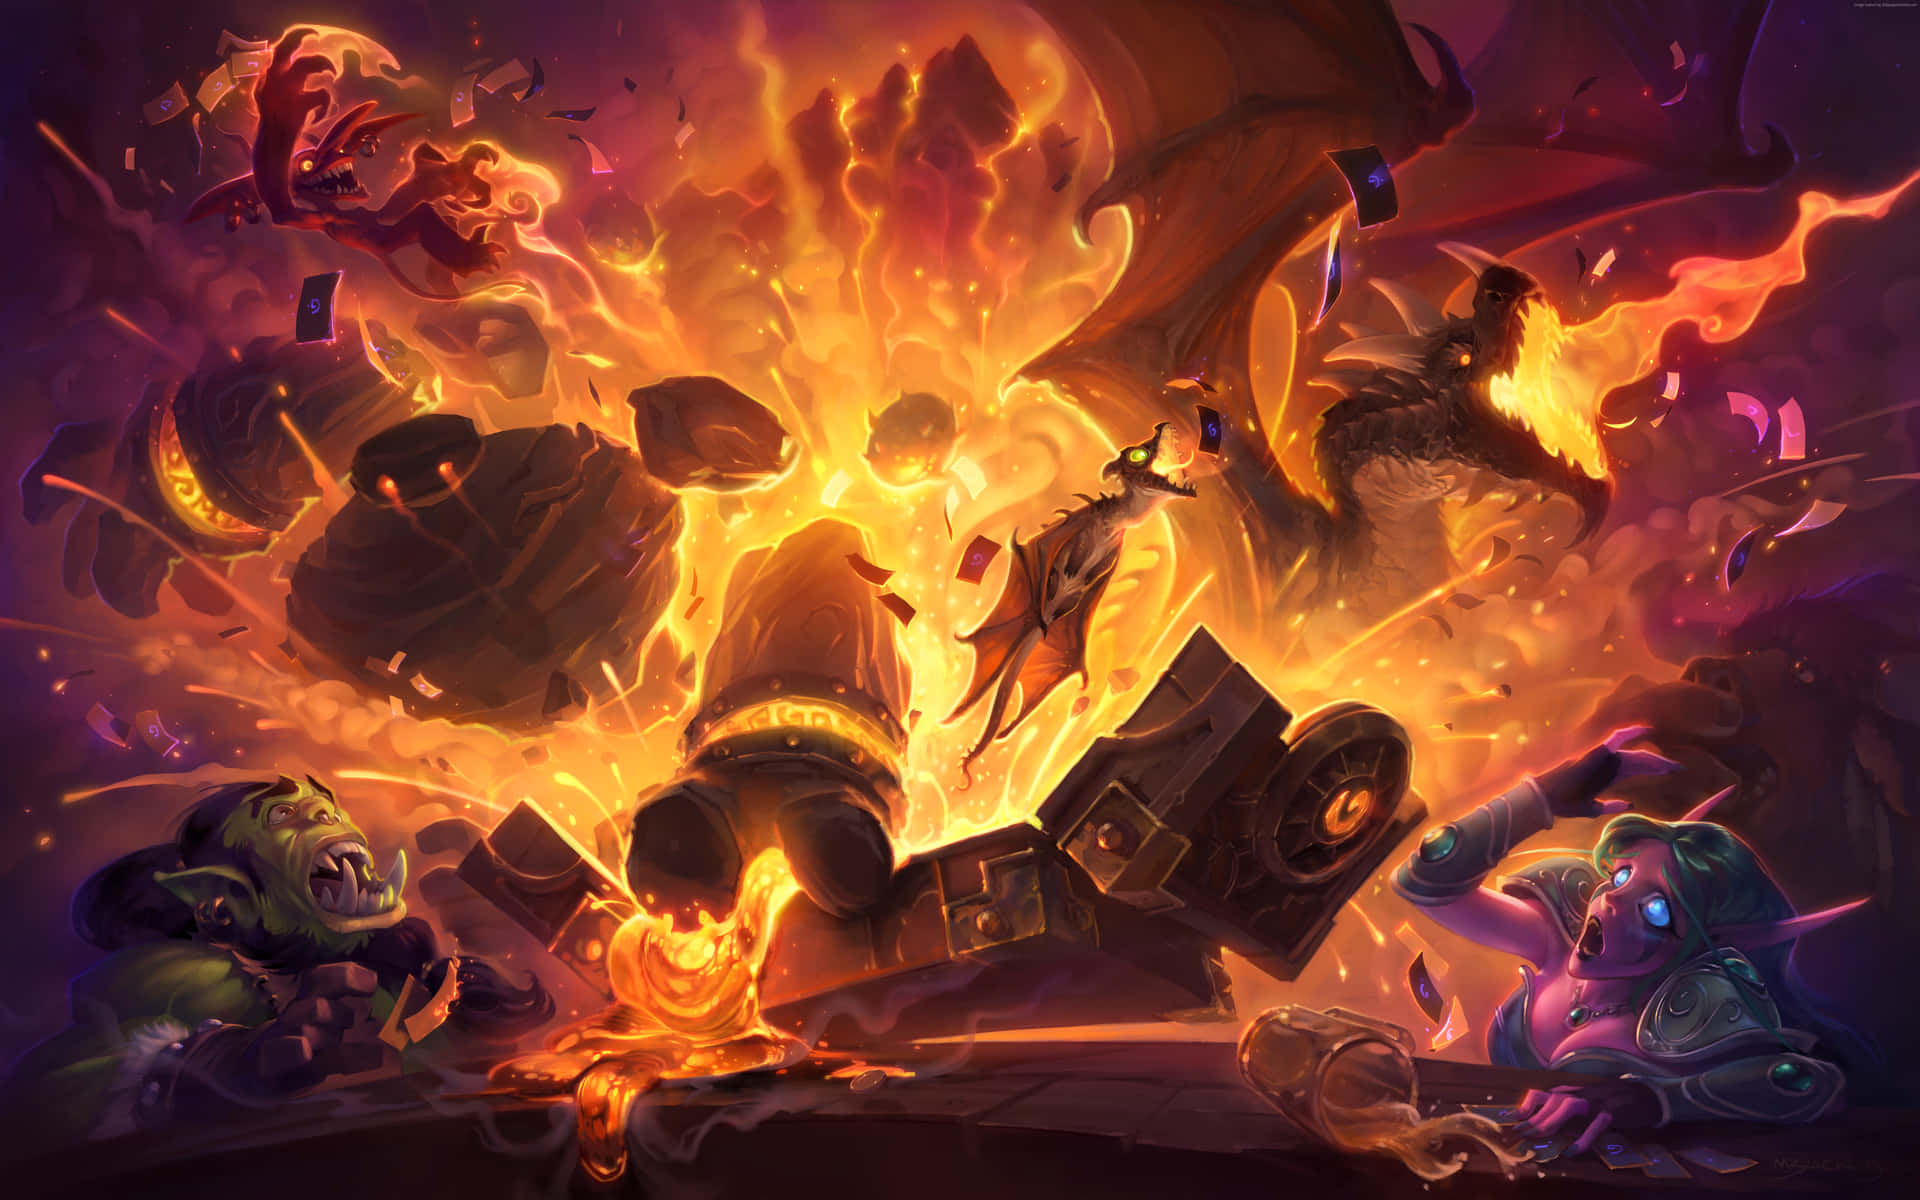 An ethereal Hearthstone card-battling scene looked over by a giant spectral dragon ready to enter play at any moment